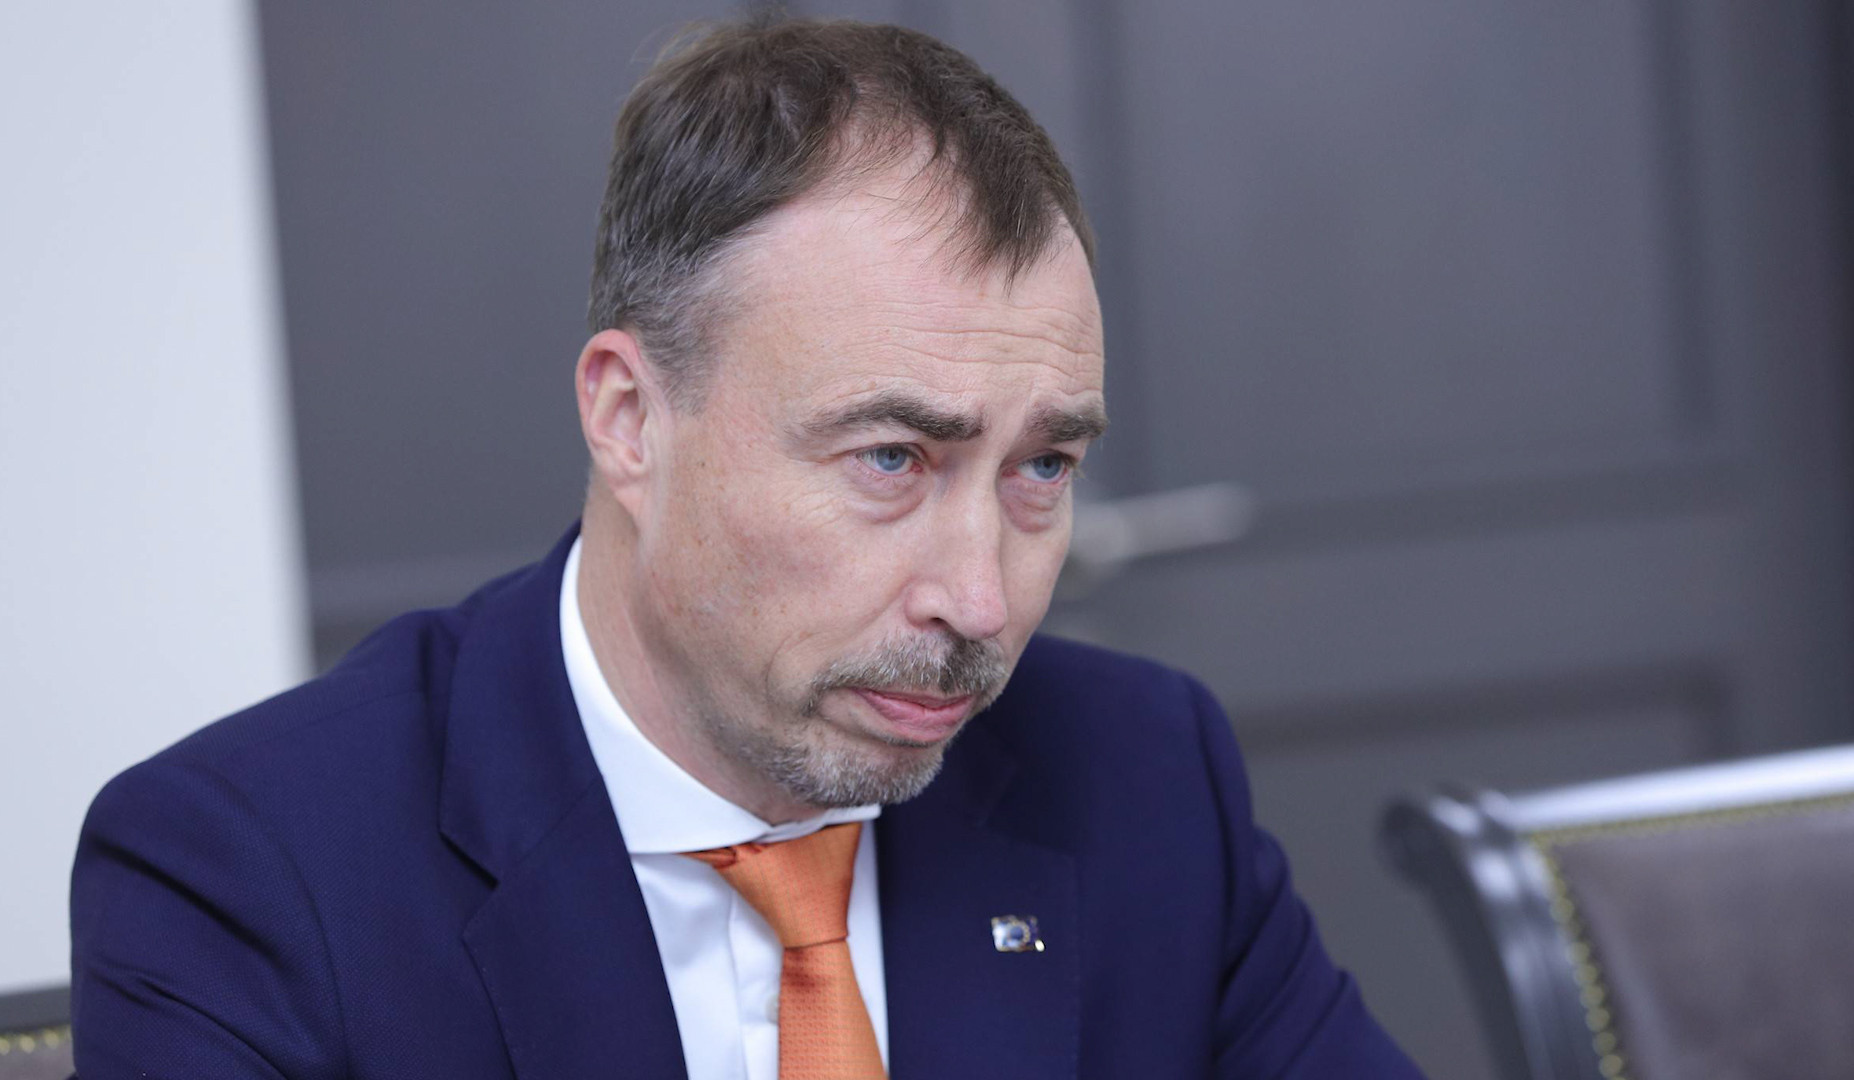 EU observation mission operates exclusively in territory of Armenia and did not enter Lachin Corridor: Toivo Klaar